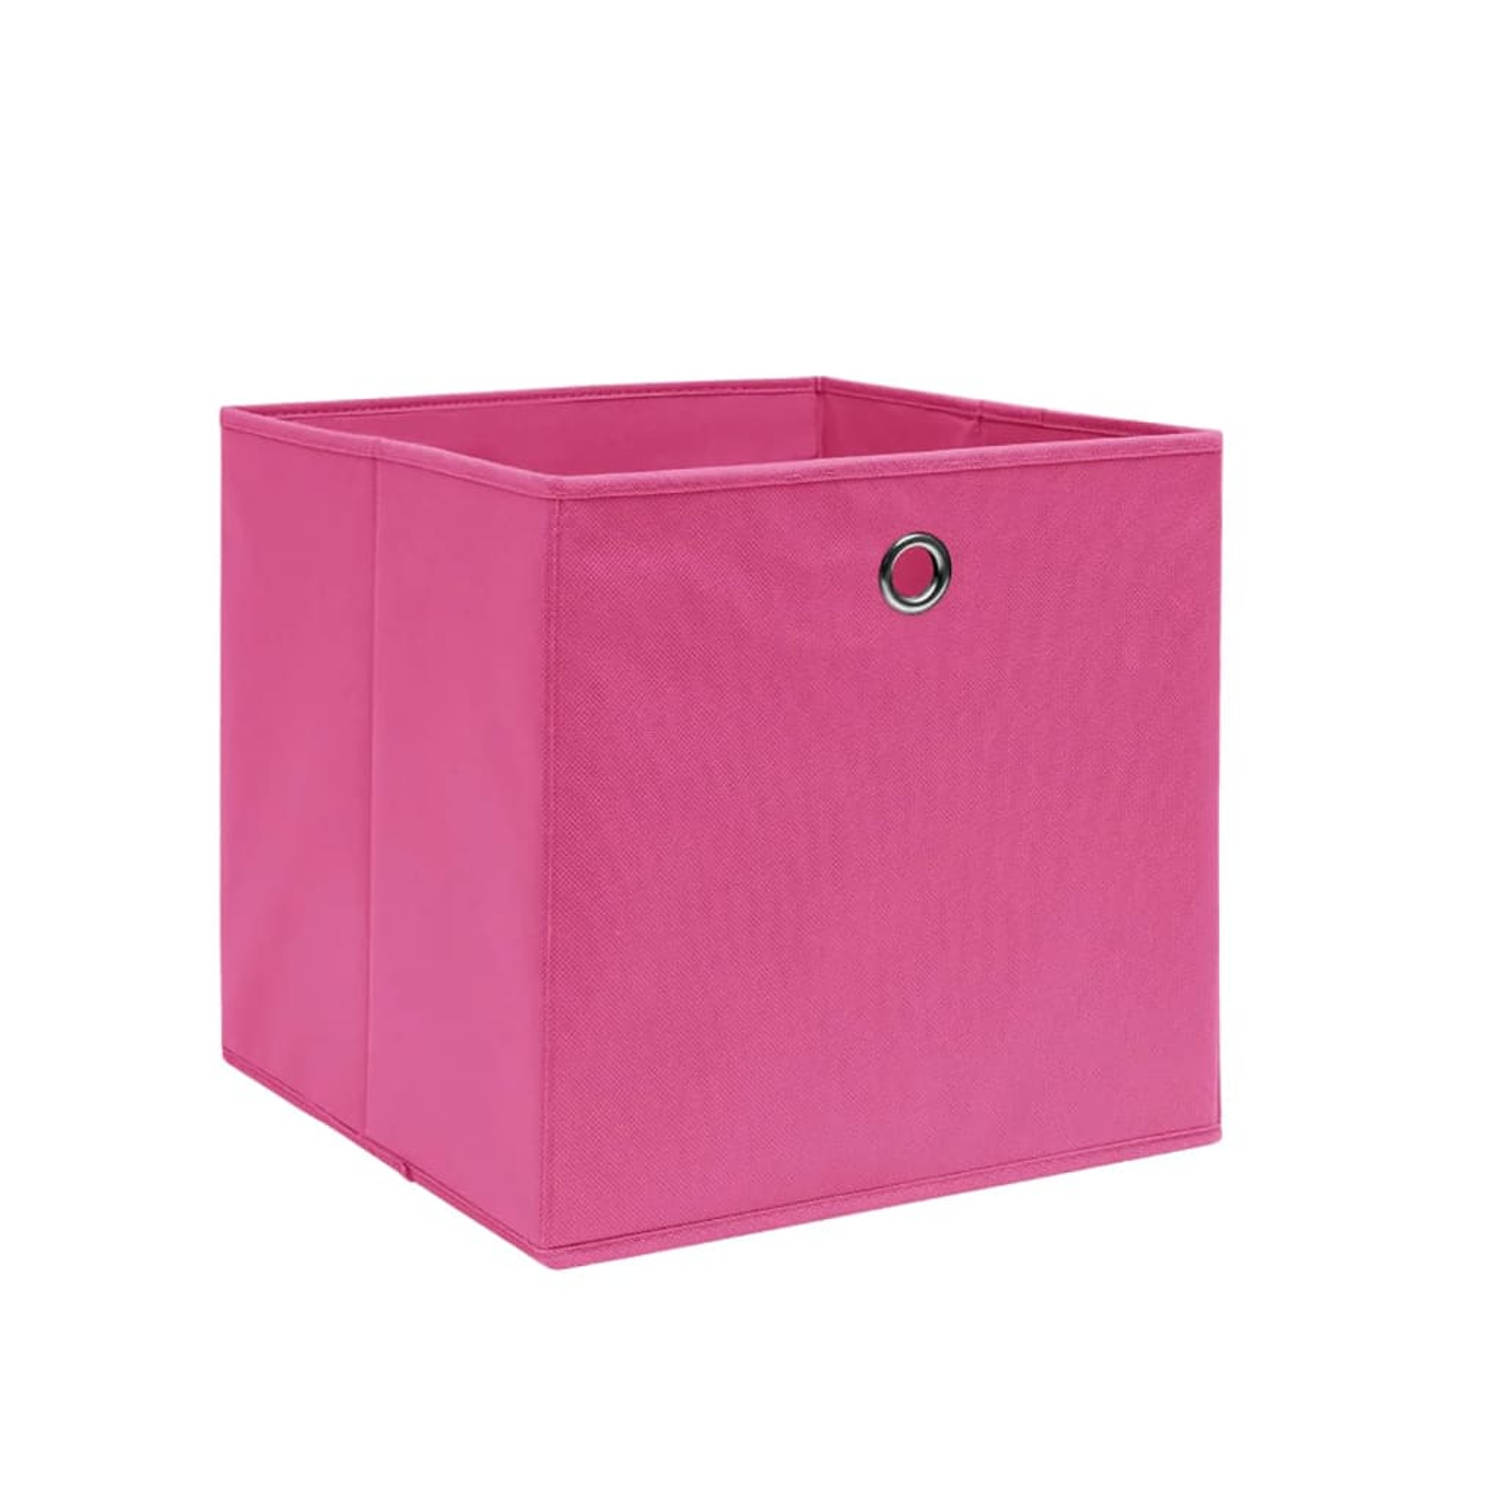 The Living Store Opbergboxen 4 st 28x28x28 cm nonwoven stof roze - Opberger